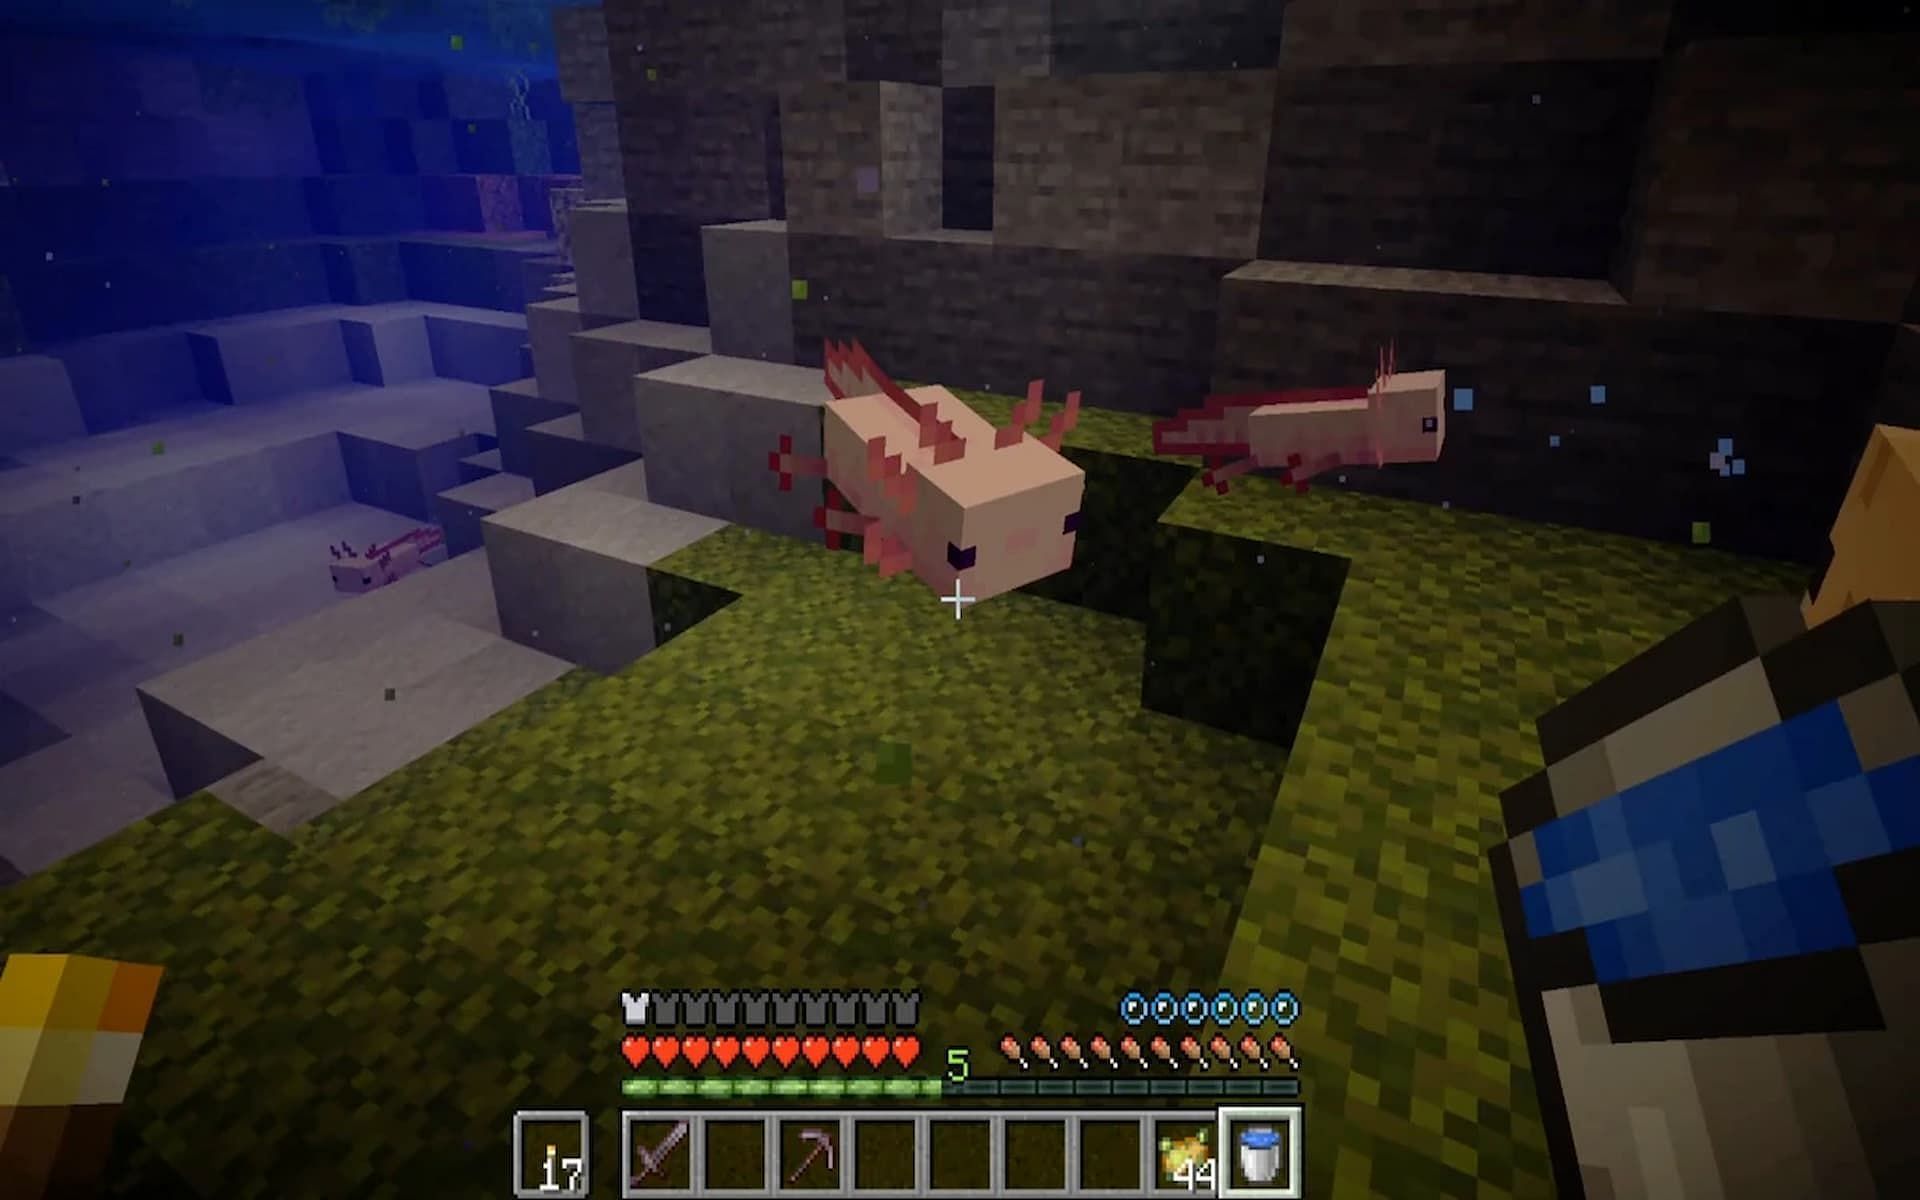 There are so many different mobs for the player to see in Minecraft (Image via Minecraft.Fandom.com)